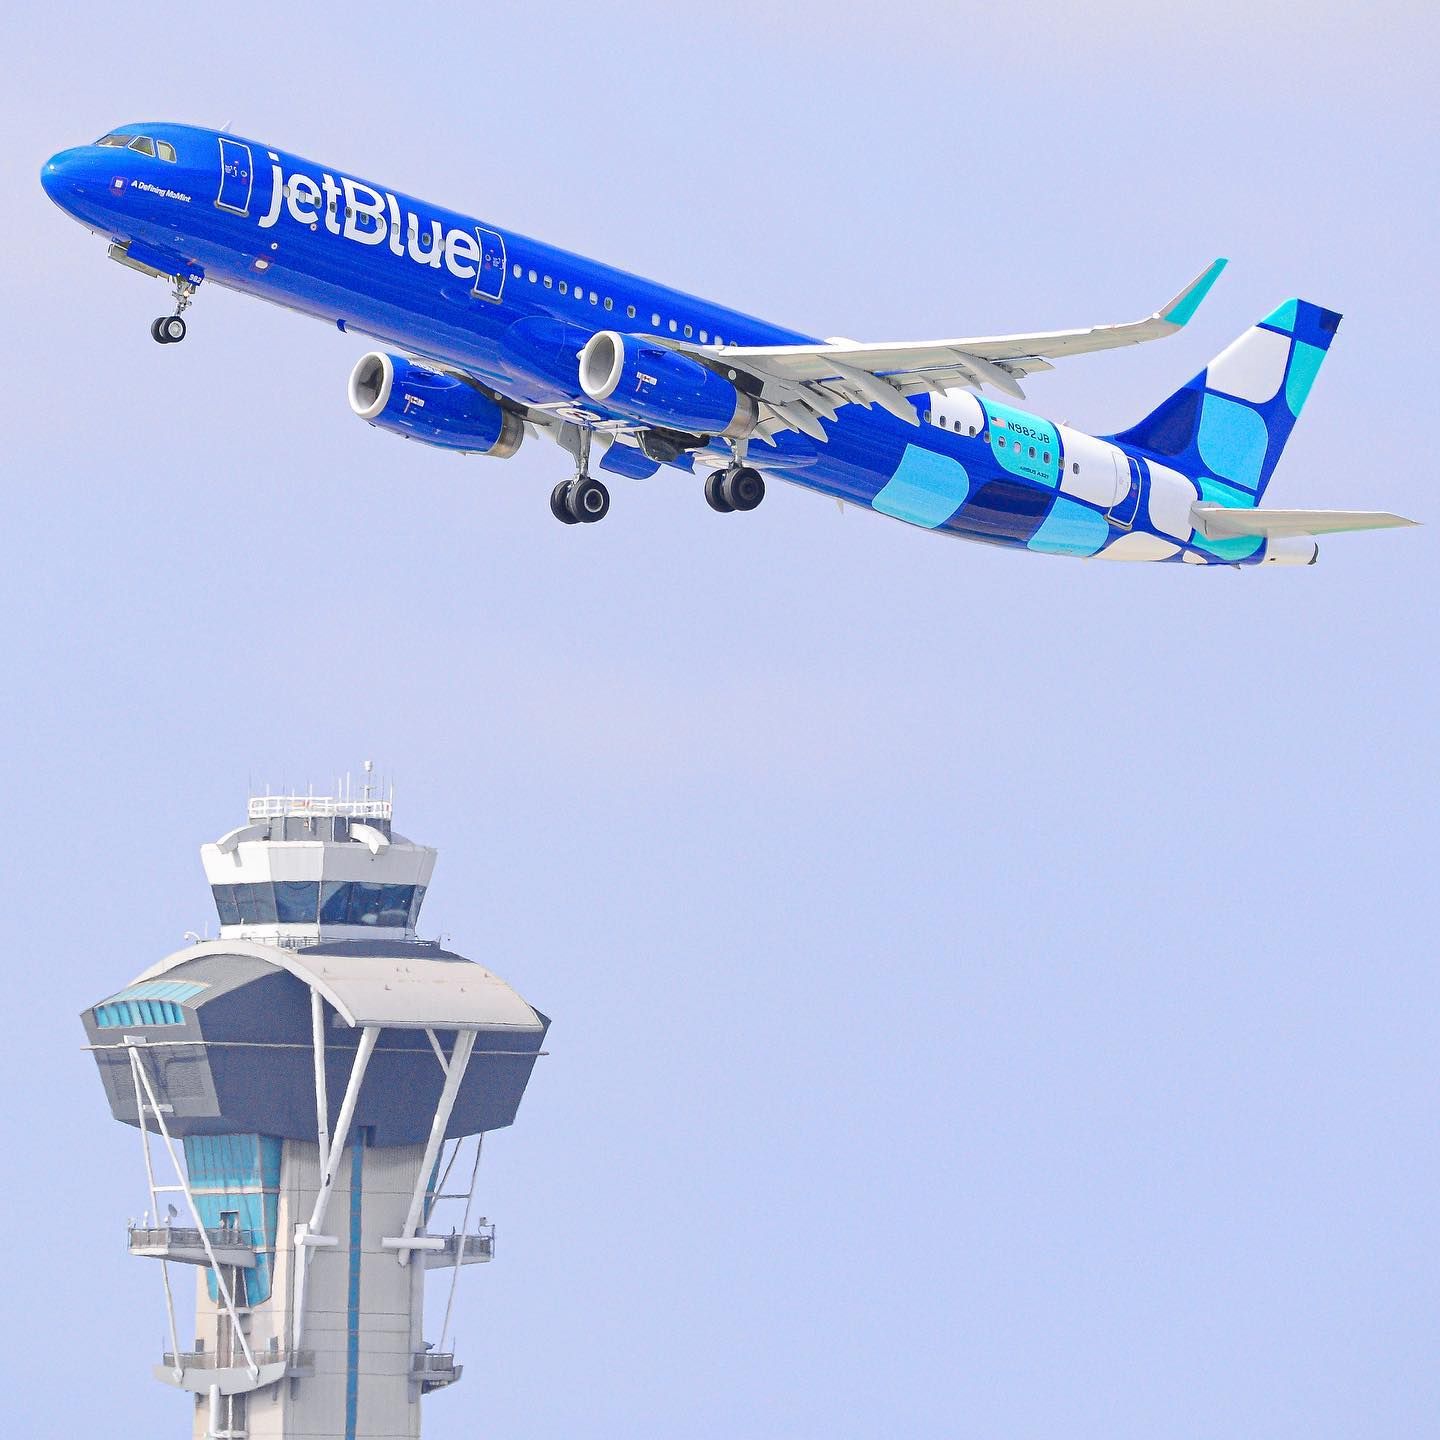 JetBlue Airways Airbus A321 taking off from Los Angeles International Airport.